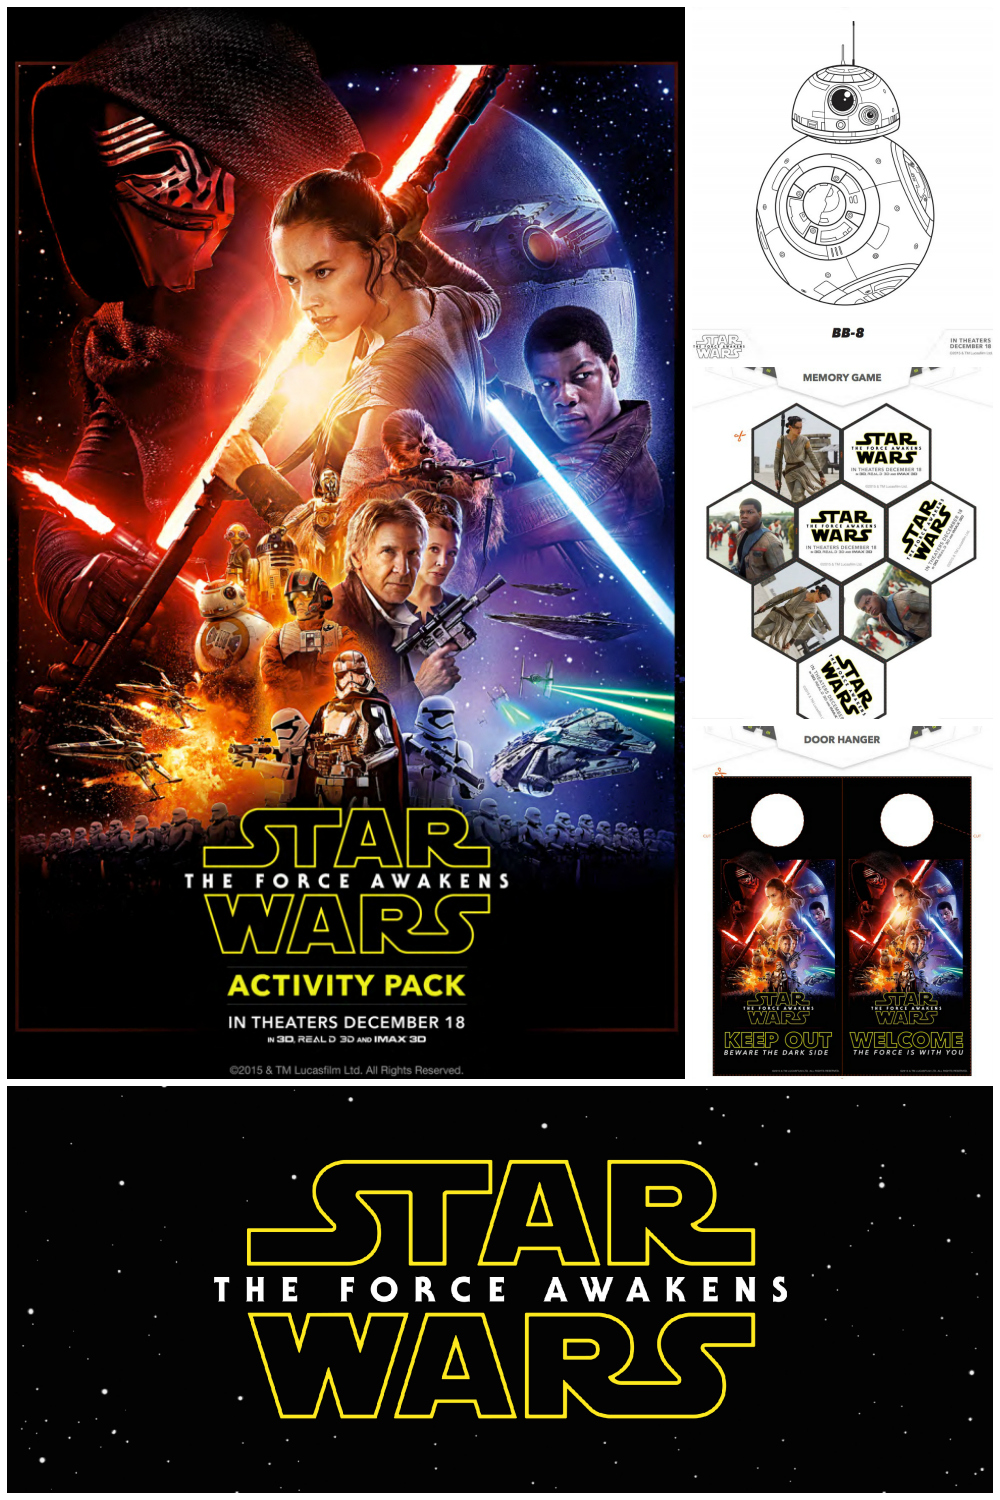 Star Wars The Force Awakens Activity Pack - games coloring pages and more